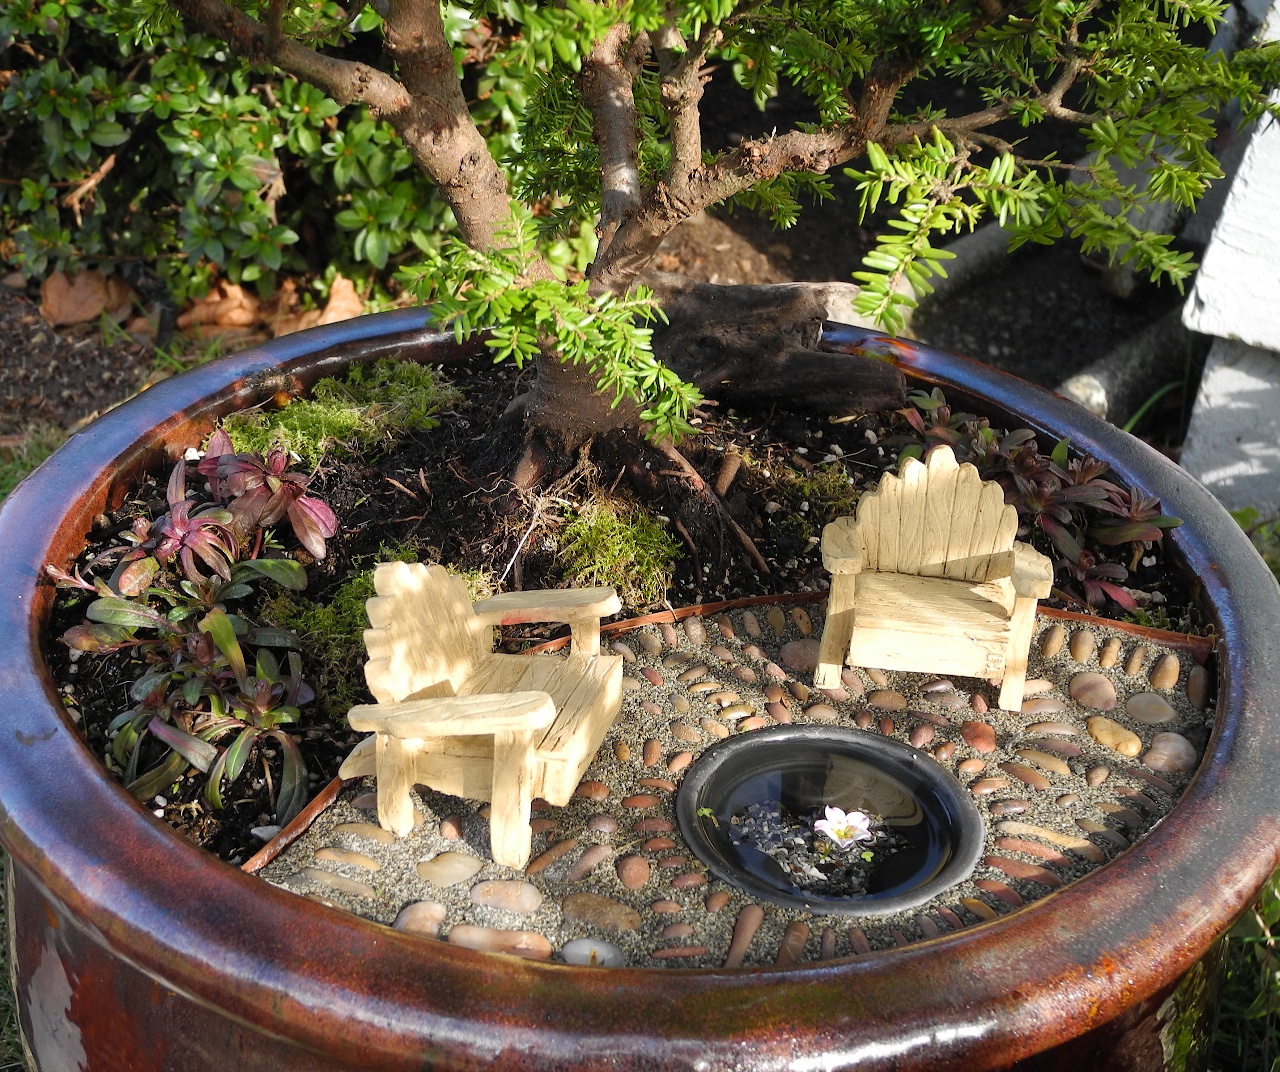 lounging chairs made of light wooden material, tiny figurines placed on pebbled surface, near miniature artificial pond, succulents and a bonsai tree